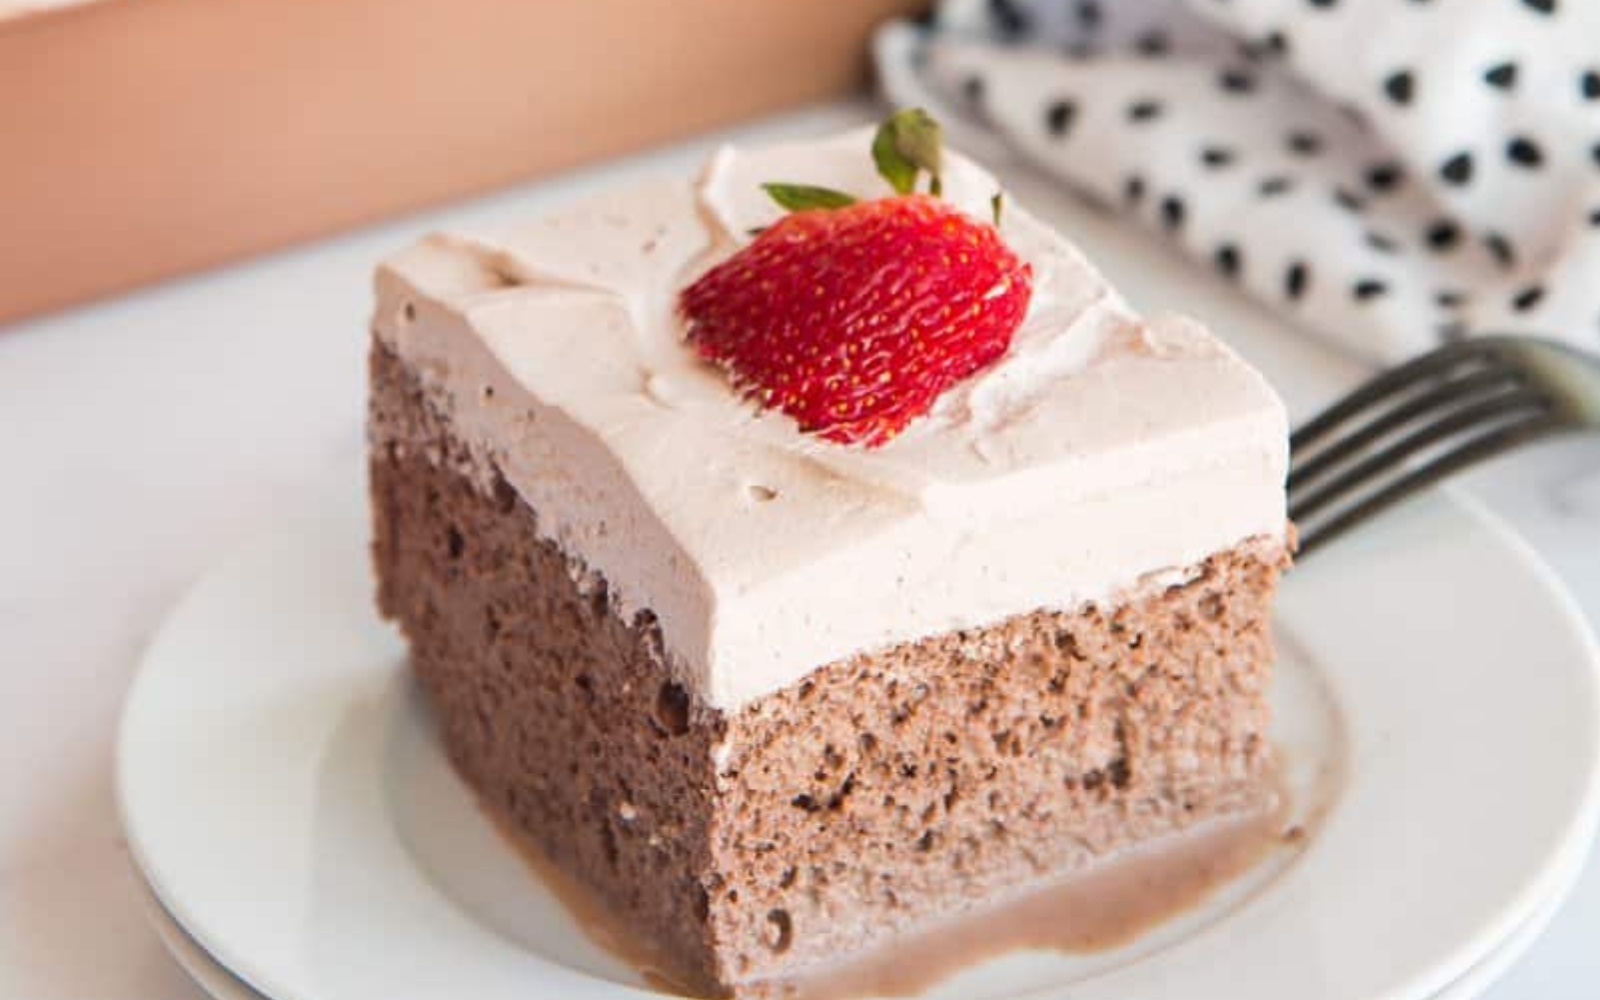 slice of chocolate tres leches cake